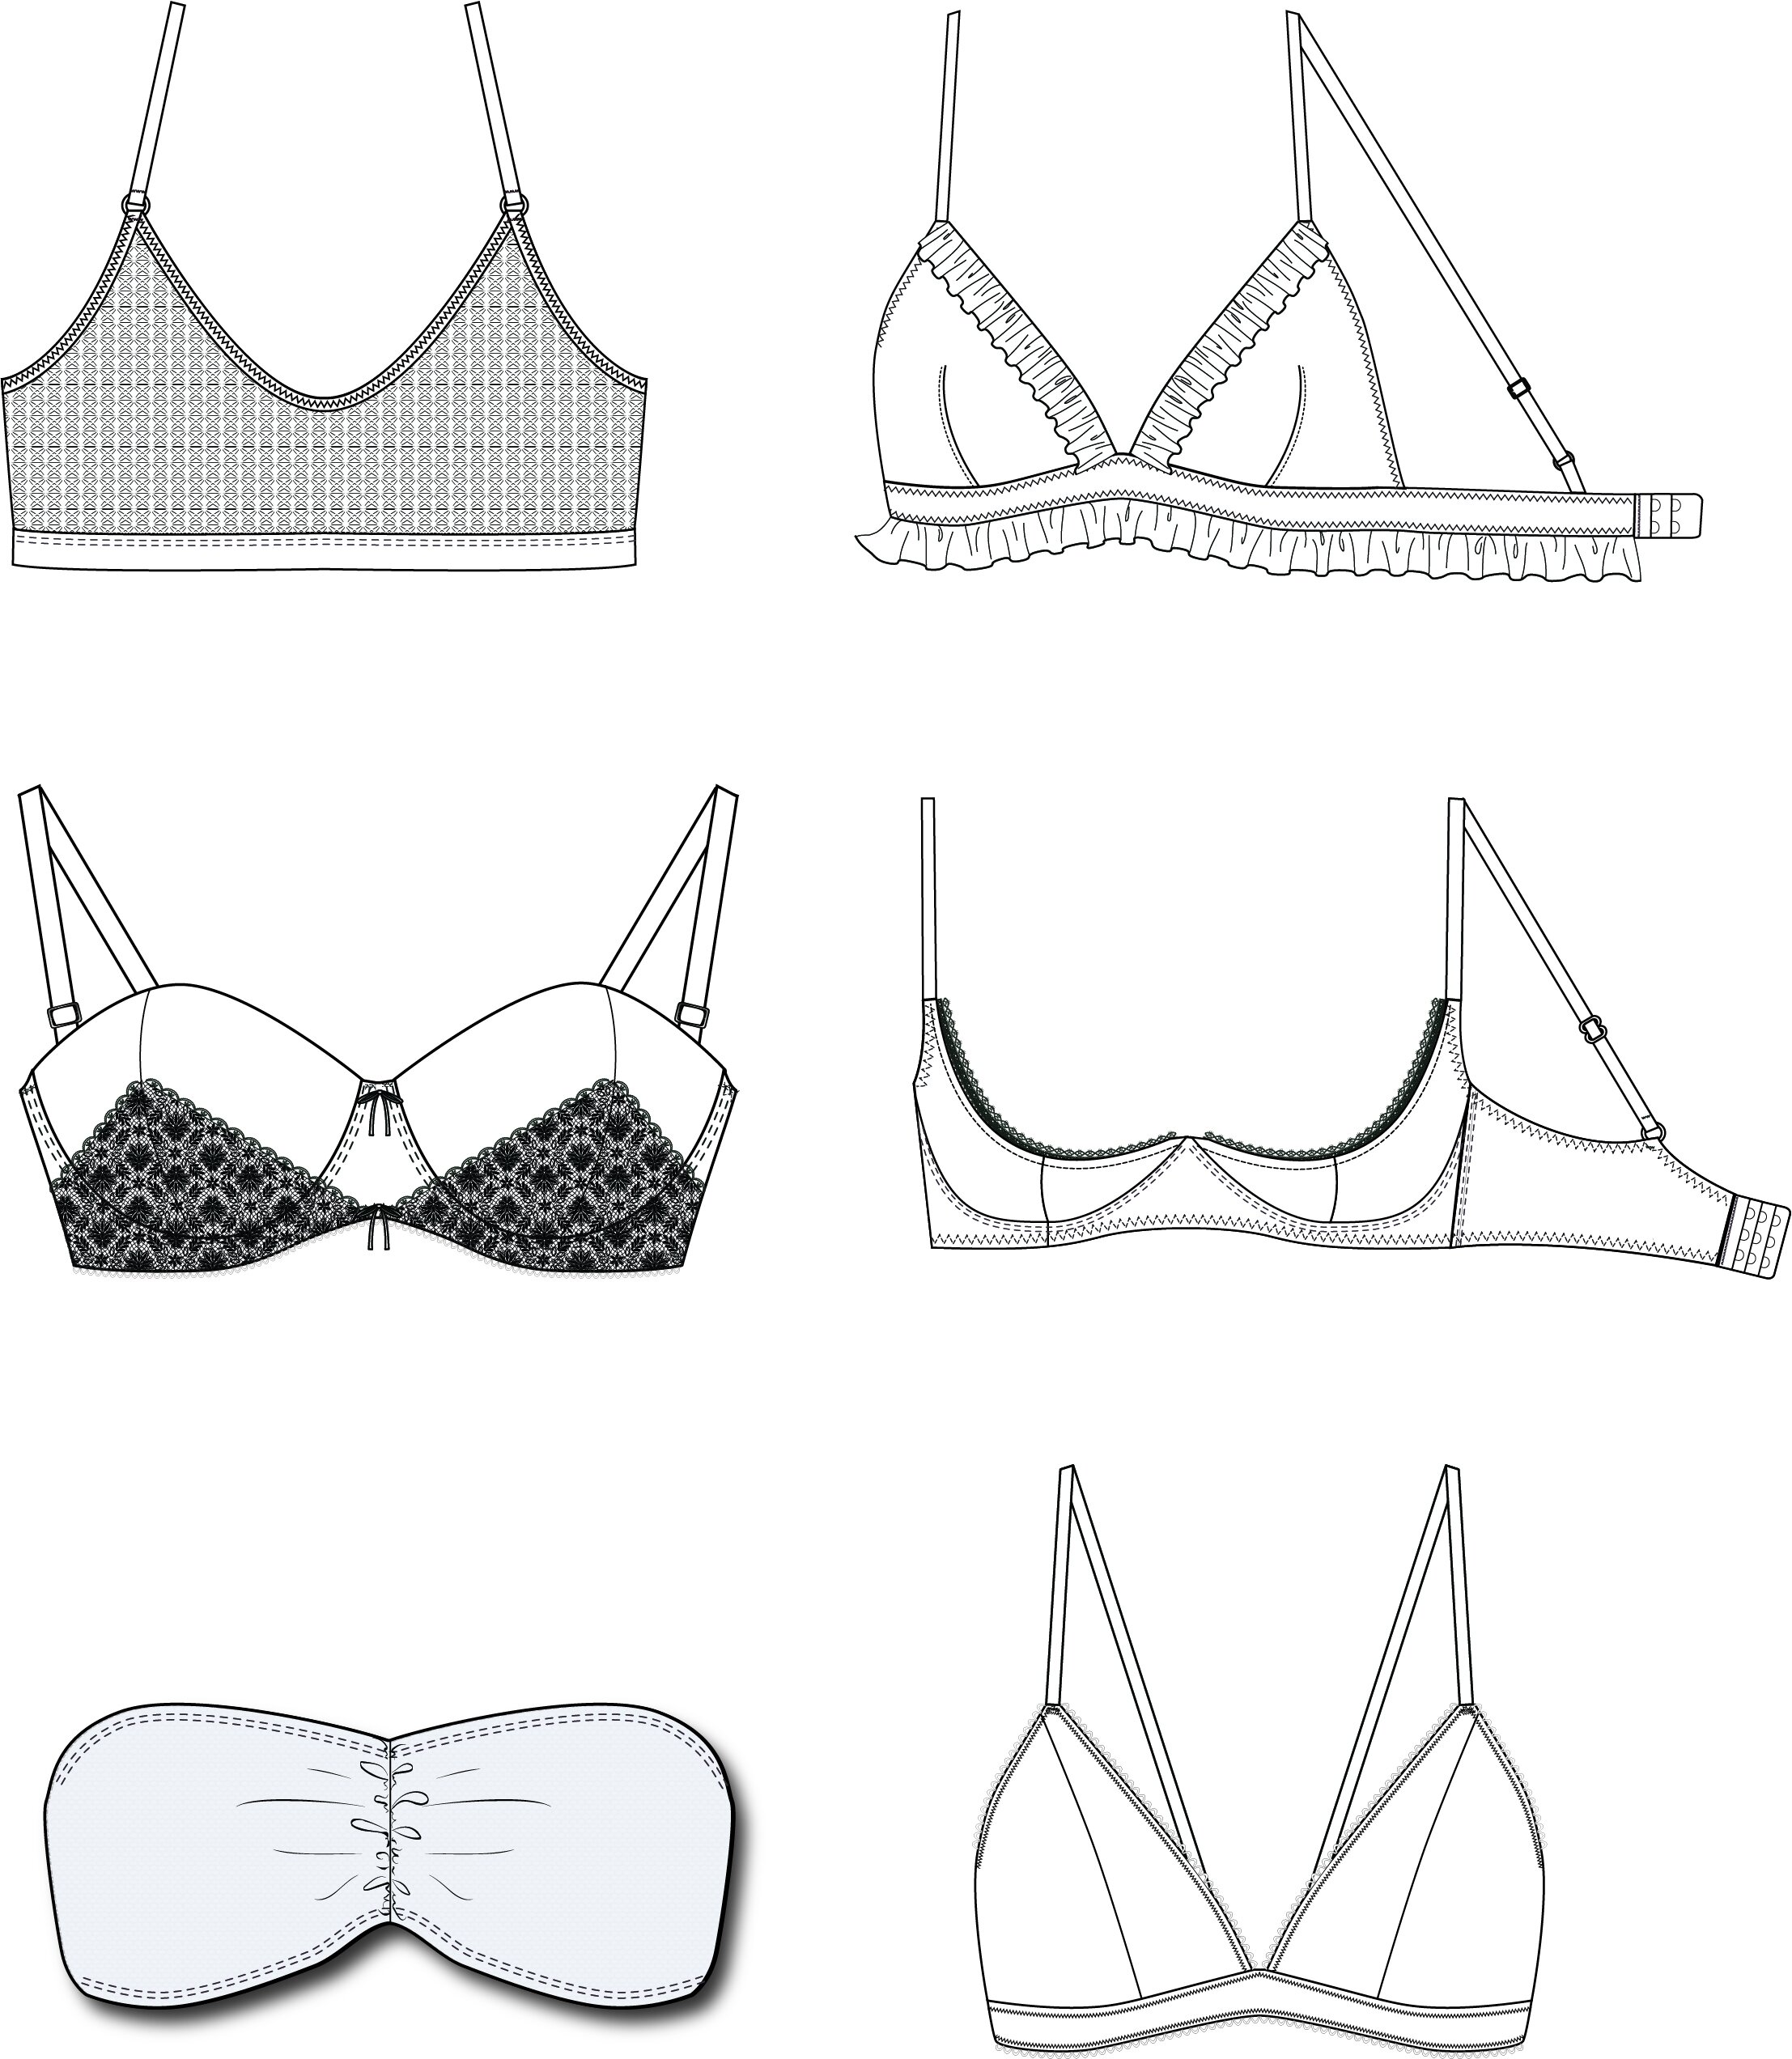 Must have detailed working drawings for your lingerie design — Van